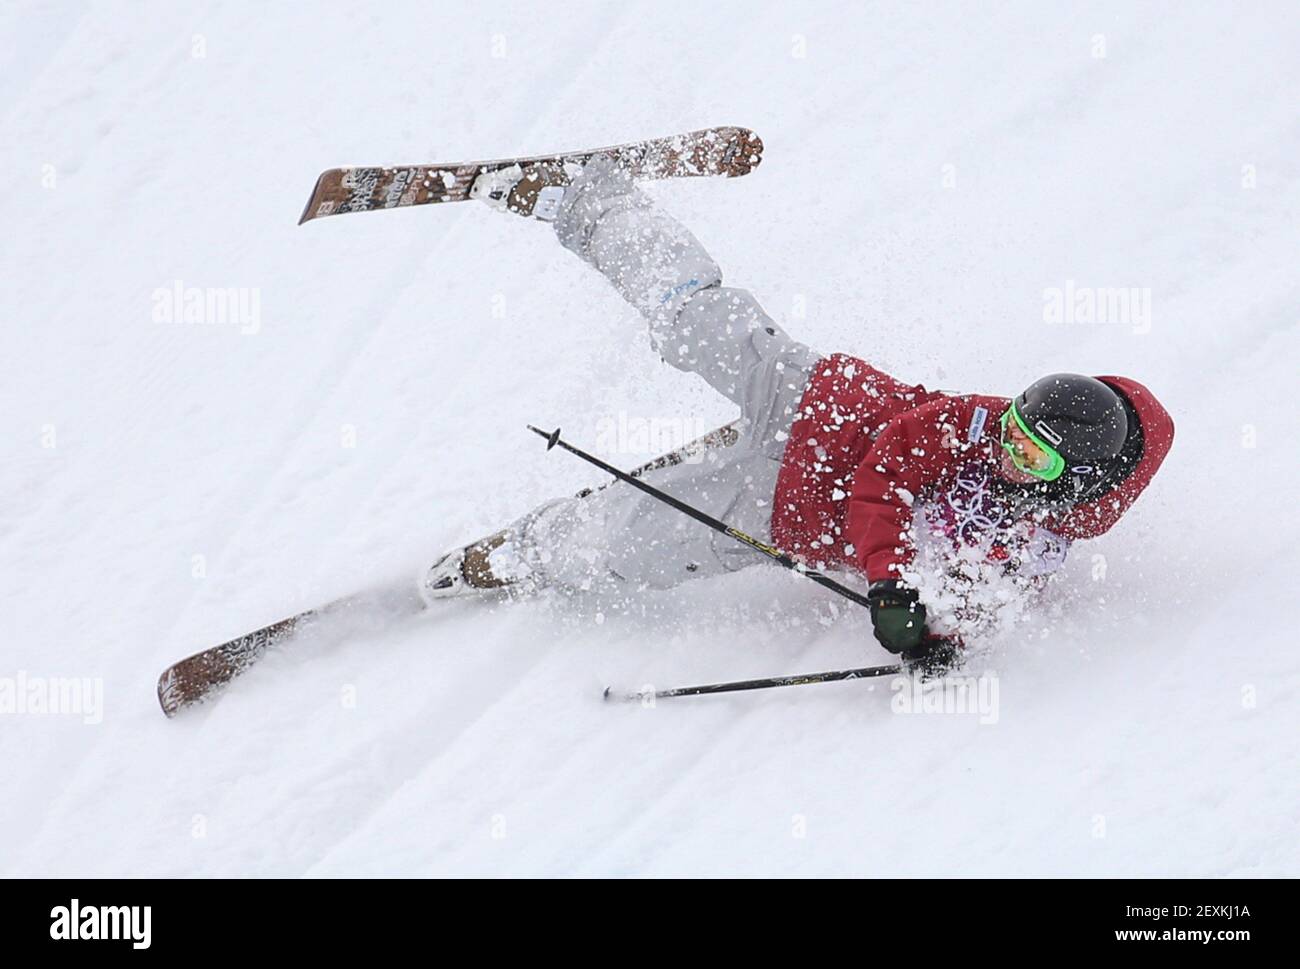 Kim Lamarre, of Canada, crashes during the ladies' ski slopestyle at the Rosa Khutor Extreme Park during the Winter Olympics in Sochi, Russia, Tuesday, Feb. 11, 2014. (Photo by Brian Cassella/Chicago Tribune/MCT/Sipa USA) Stock Photo